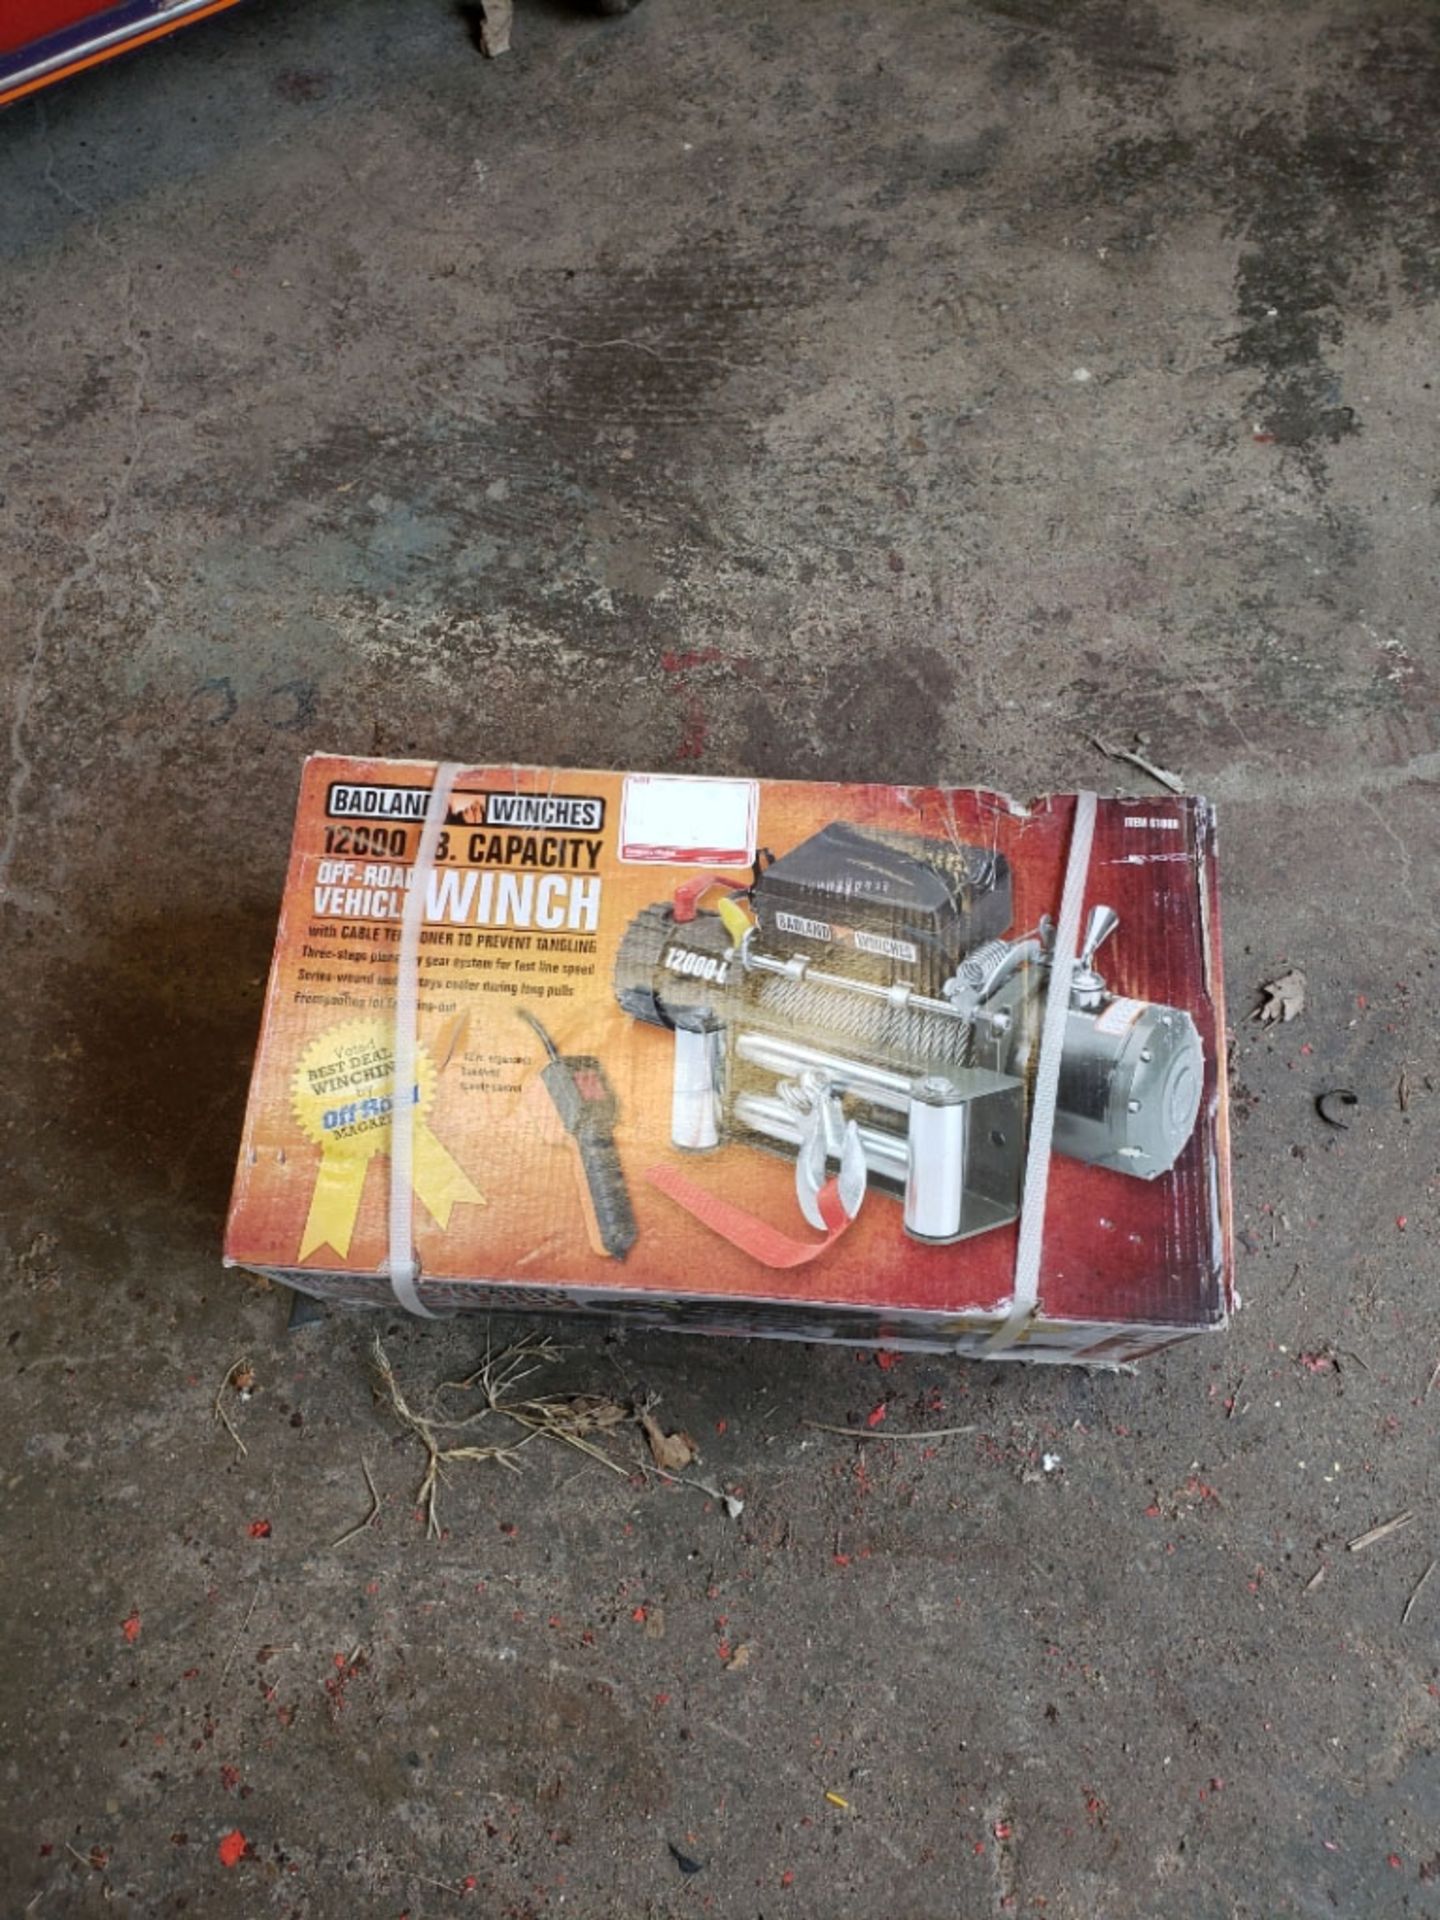 NEW IN BOX - BADLAND 12,000LBS CAP OFF-ROAD VEHICLE WINCH